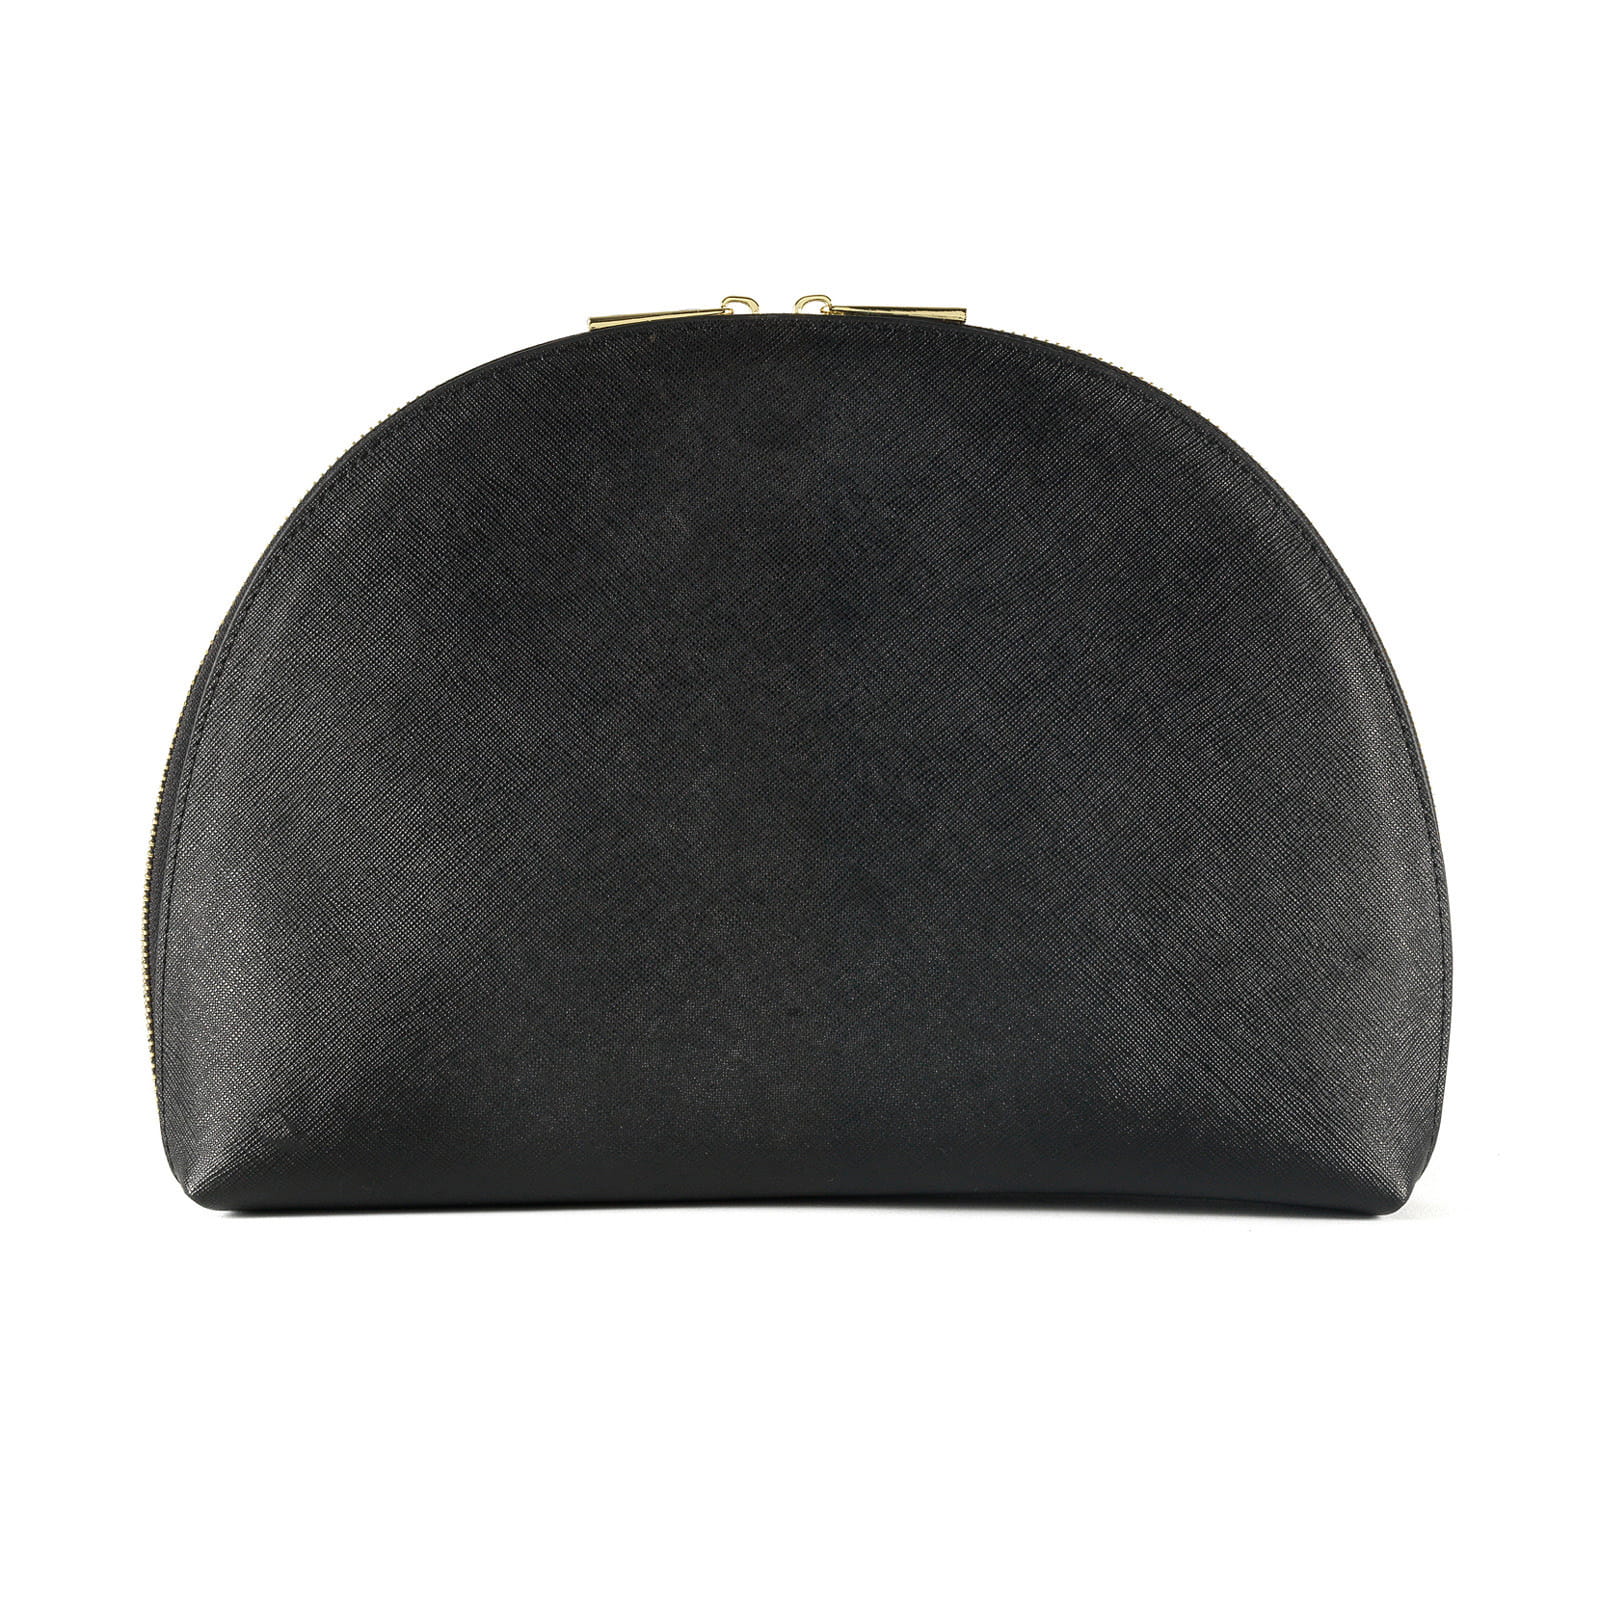 Blank Personalised Black Saffiano Leather Half Moon Clutch